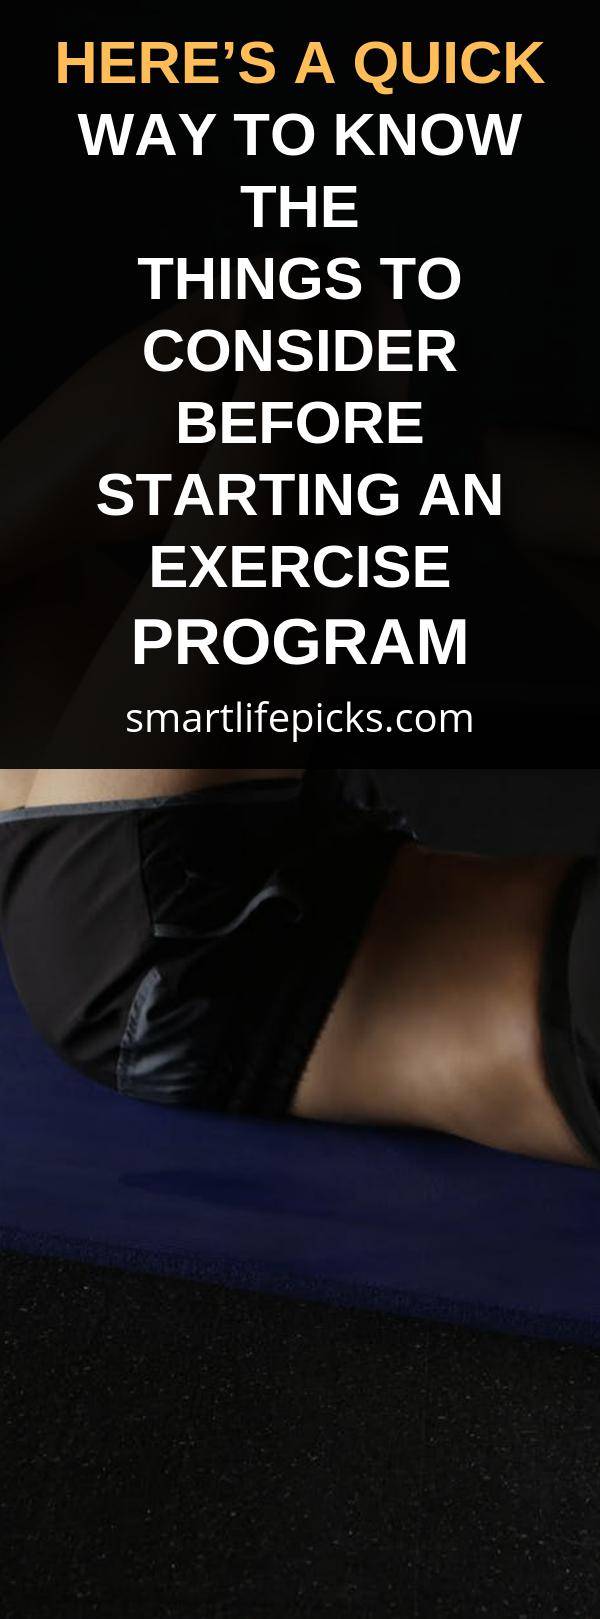 Know What to Consider Before Starting an Exercise Program